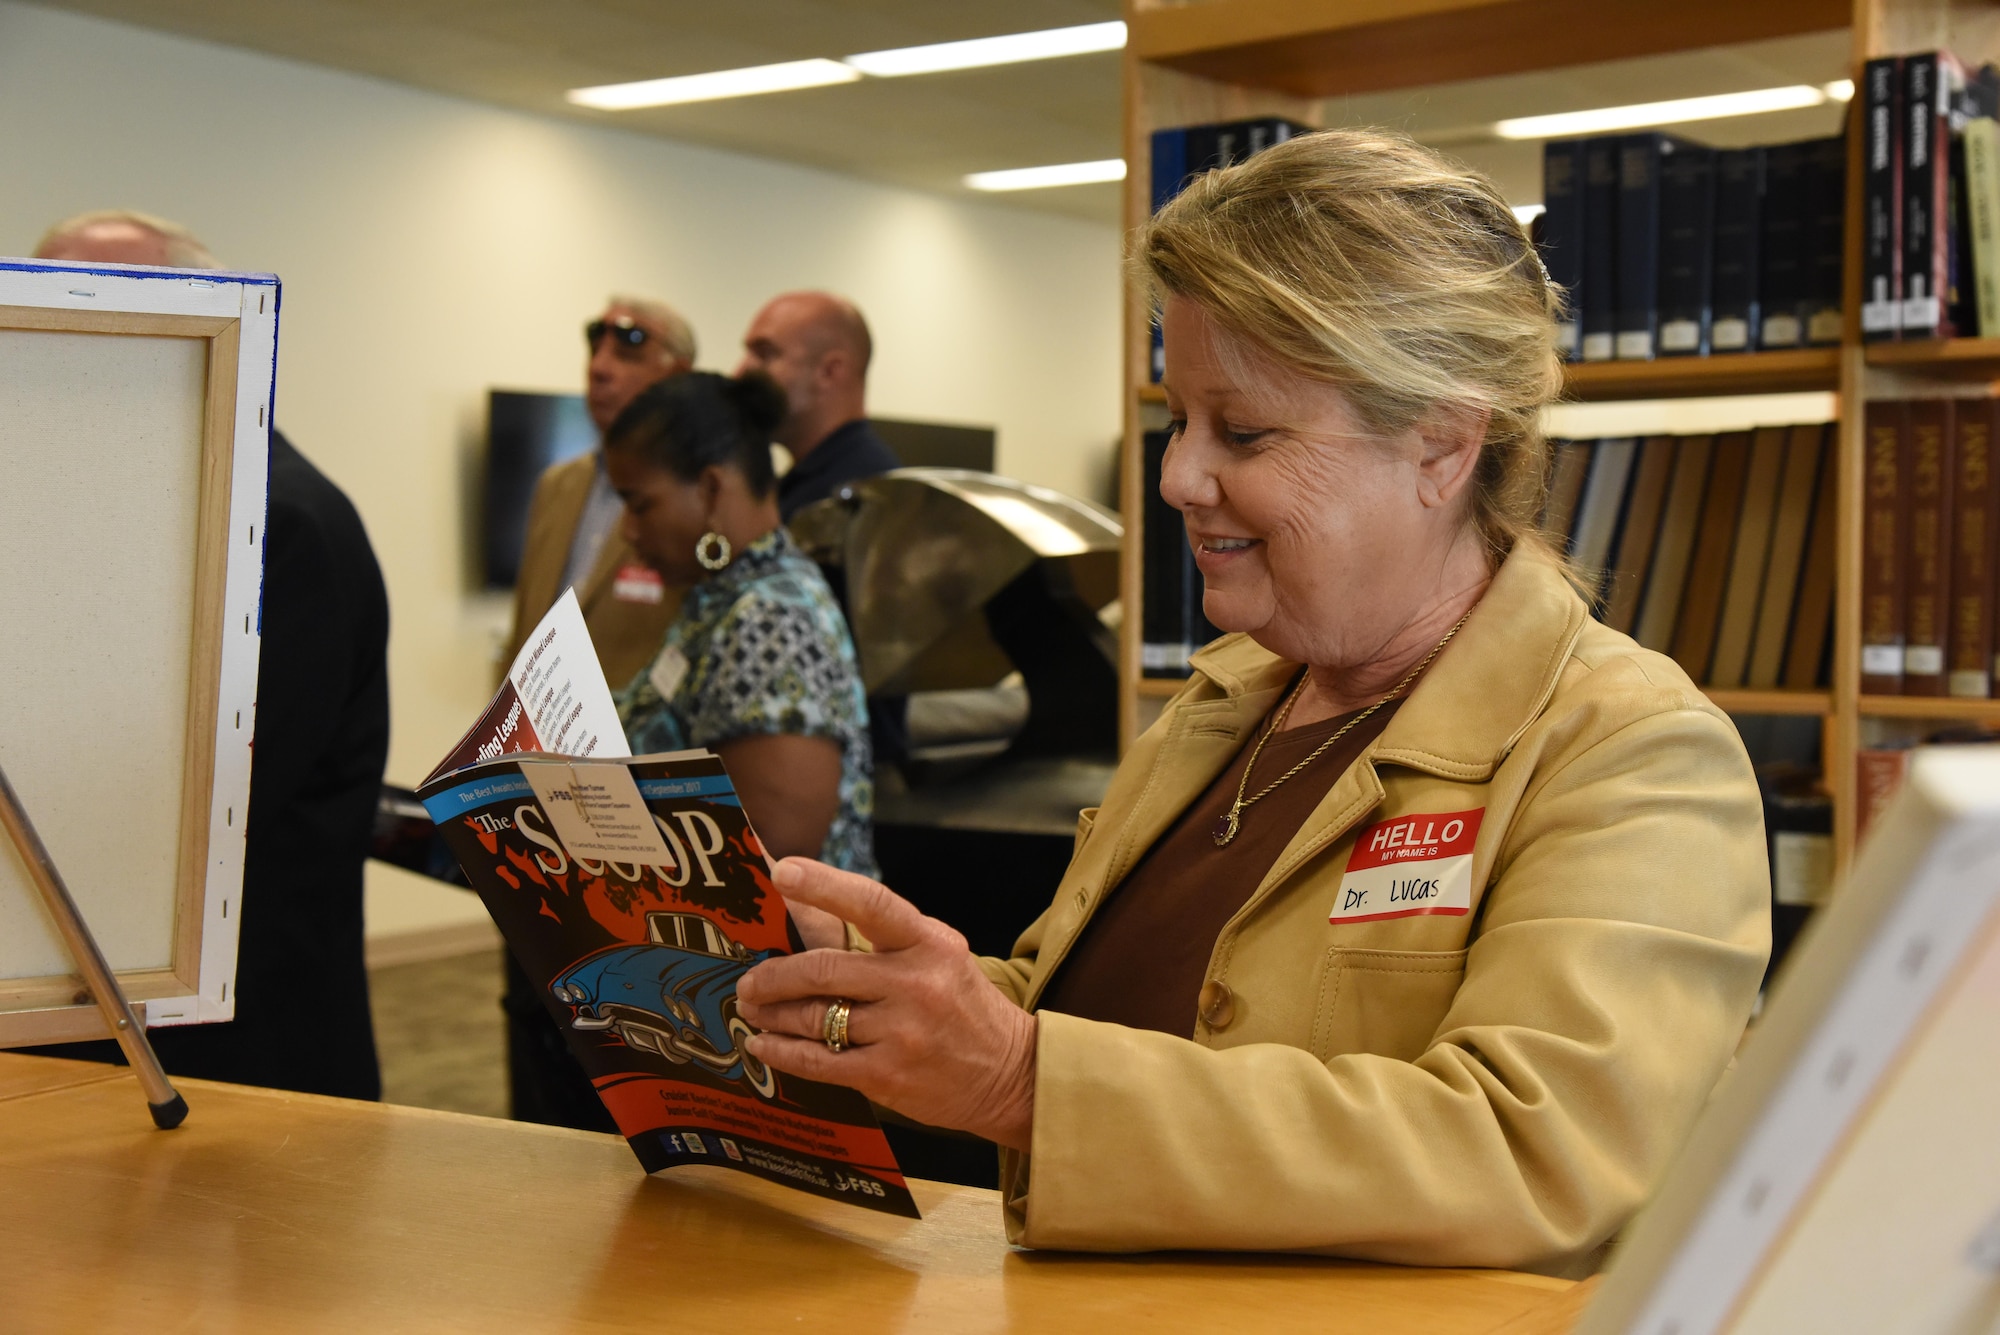 Dr. Karen Lucas, Tulane University of Continuing Studies associate dean, views a copy of The Scoop while touring the McBride Commons during an honorary commanders 81st Mission Support Group orientation tour Aug. 10, 2017, on Keesler Air Force Base, Miss. The honorary commander program is a partnership between base leadership and local civic leaders to promote strong ties between military and civilian leaders. (U.S. Air Force photo by Kemberly Groue)